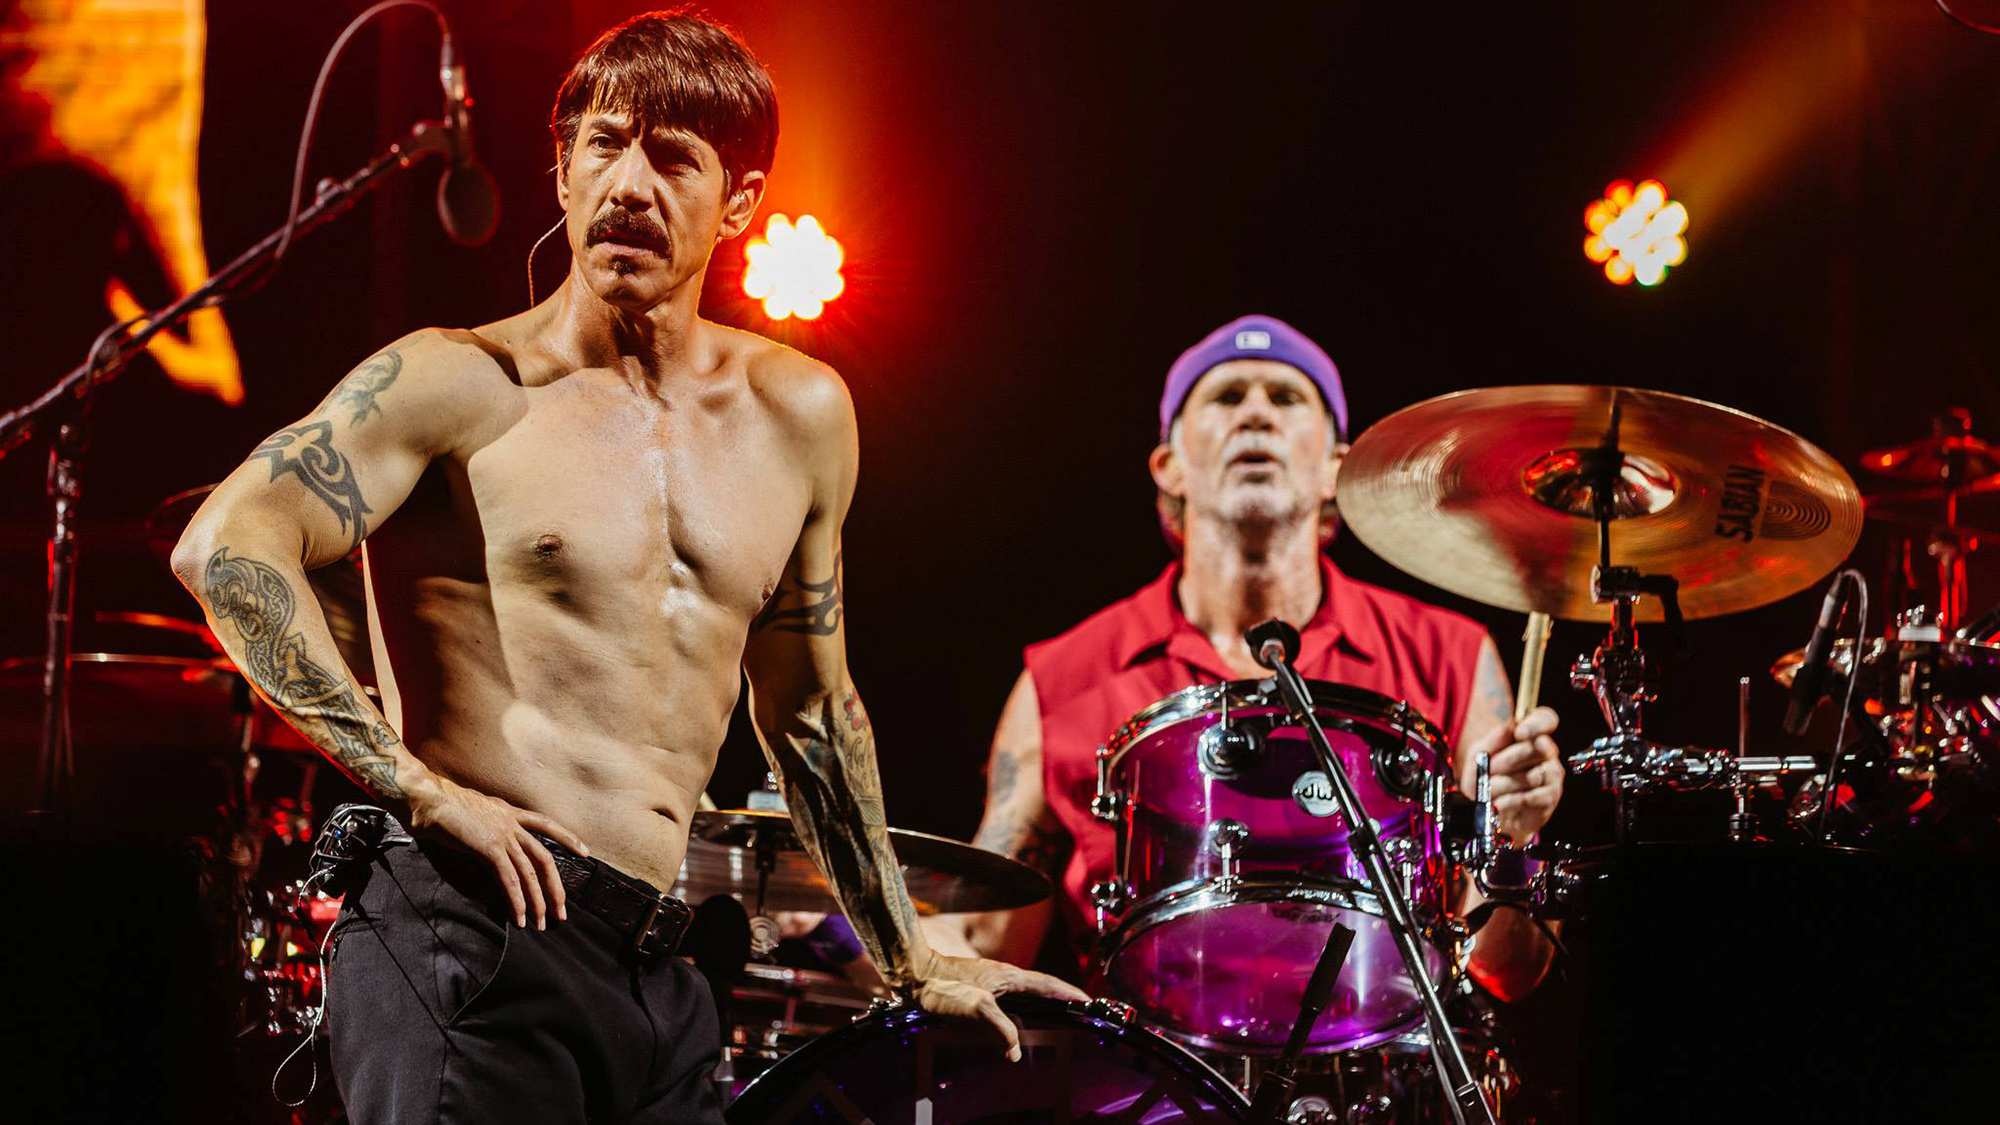 Red Hot Chili Peppers: Album number 12 from the Los Angeles rockers, Hit the top spot of the Billboard 200. 2000x1130 HD Background.